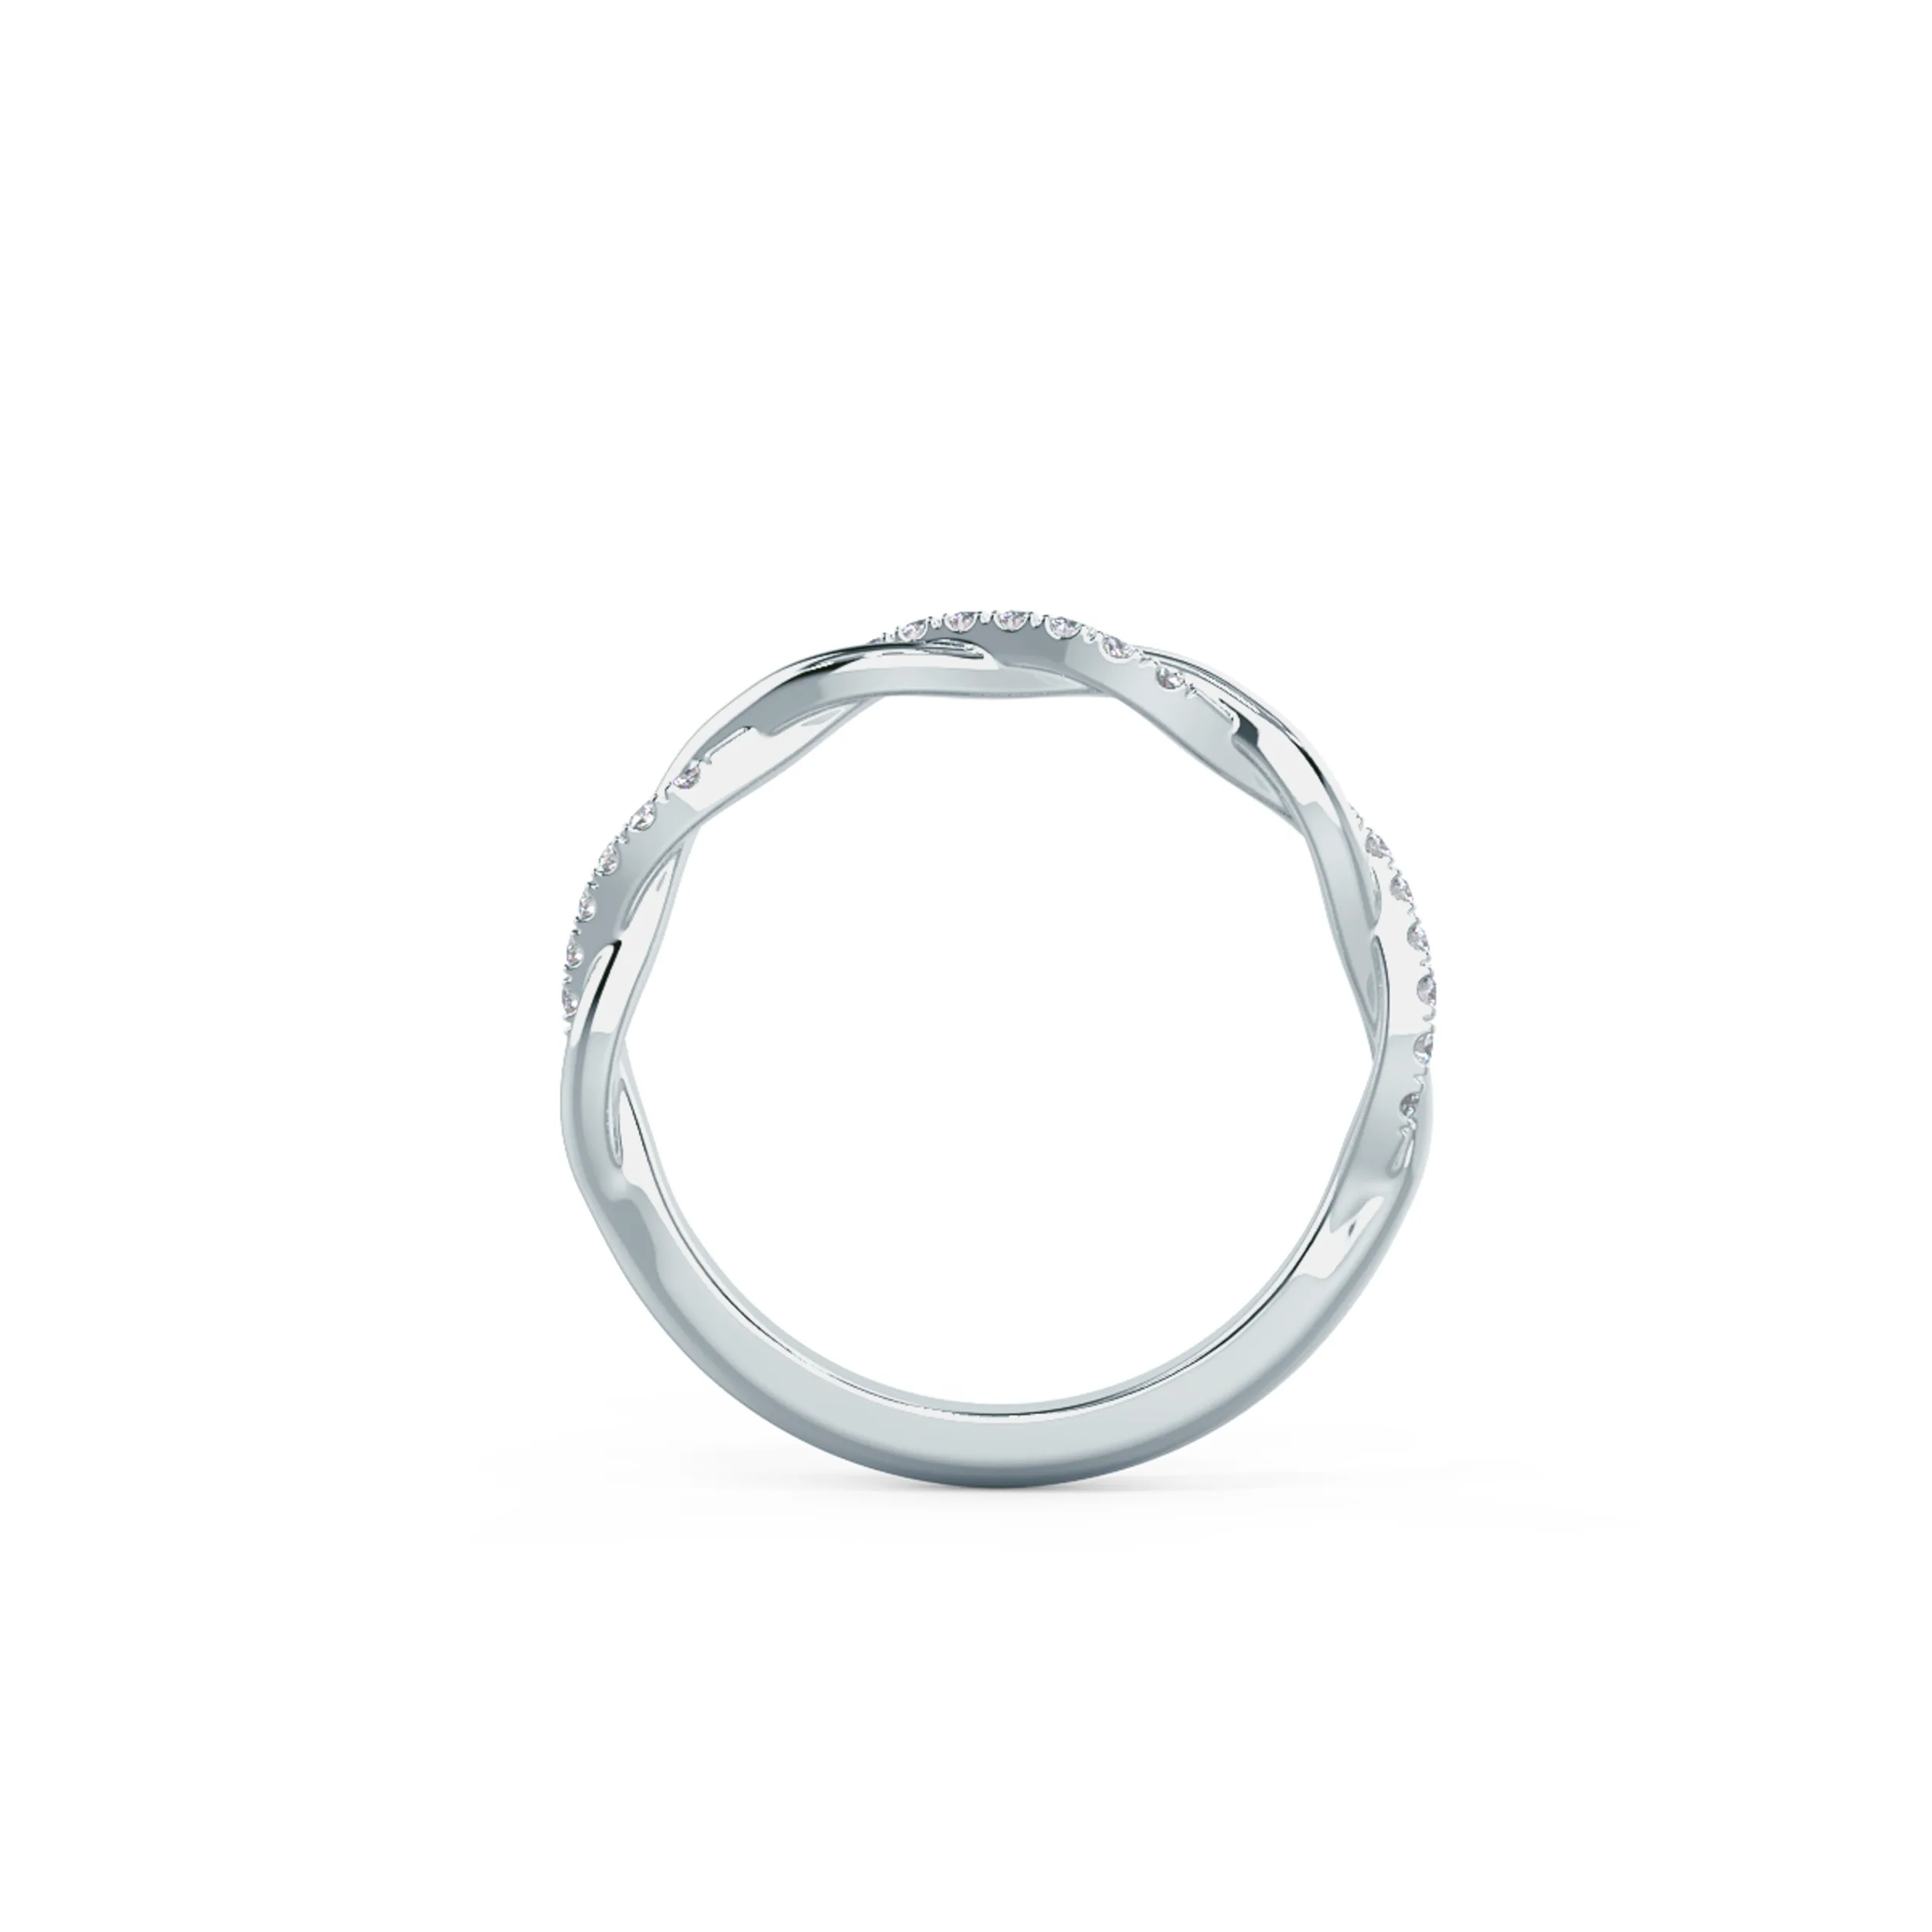 Hand Selected 0.15 ctw Round Created Diamonds set in 18k White Gold Infnity Twisting Light Half Band (Profile View)